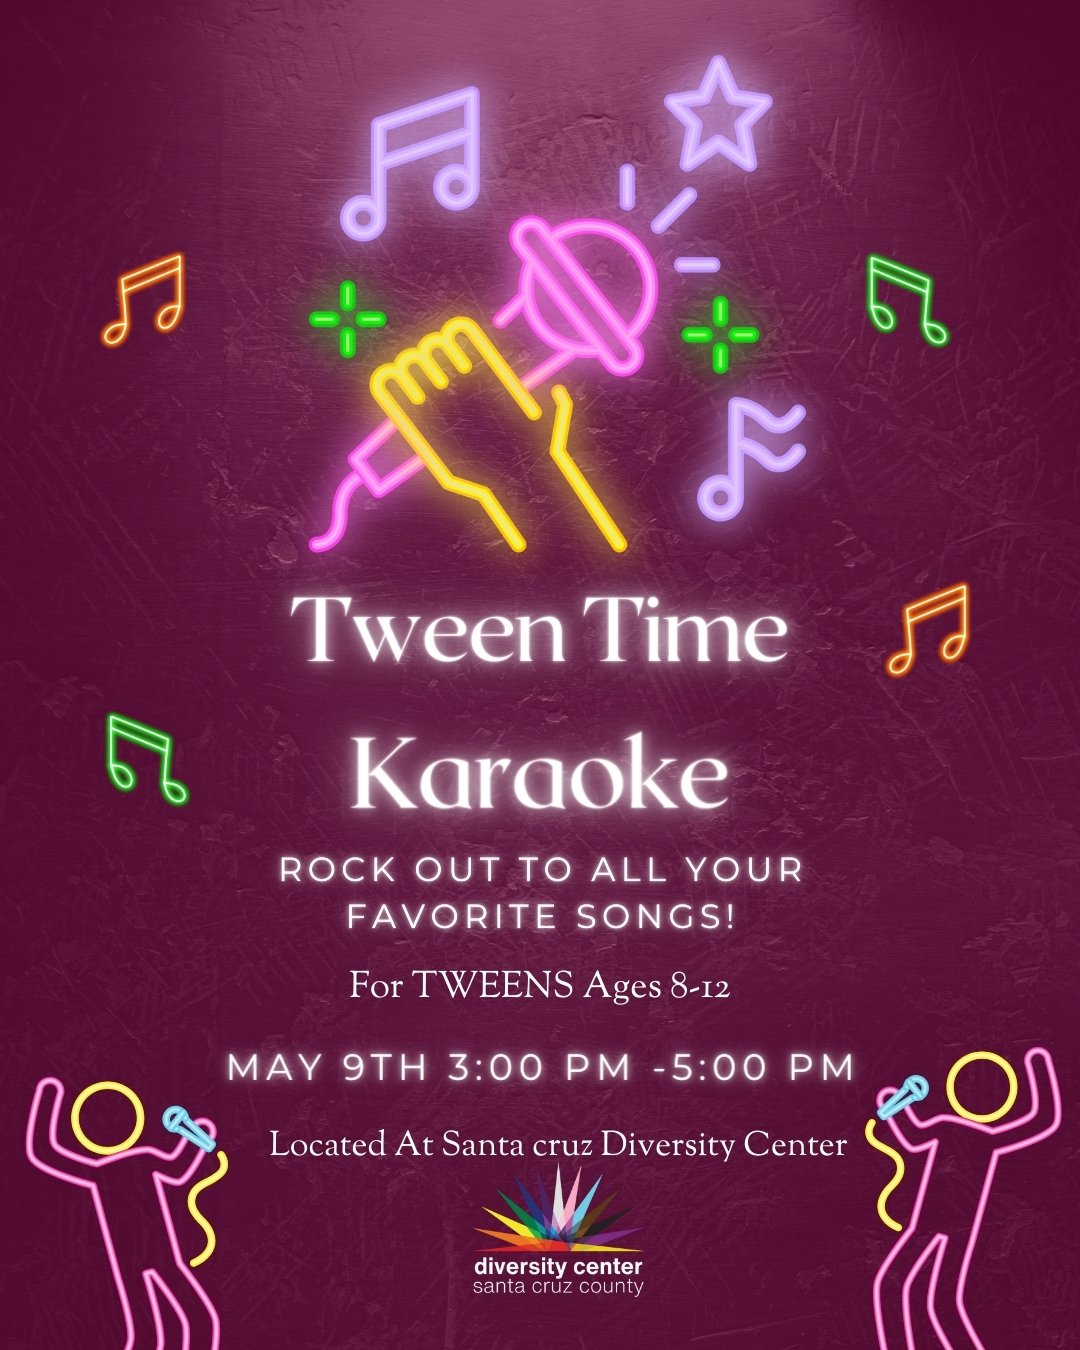 Join us for an electrifying karaoke extravaganza designed specifically for tweens! Get ready to unleash your inner superstar and sing your heart out at this exciting event. Whether you're belting out your favorite tunes solo or harmonizing with frien